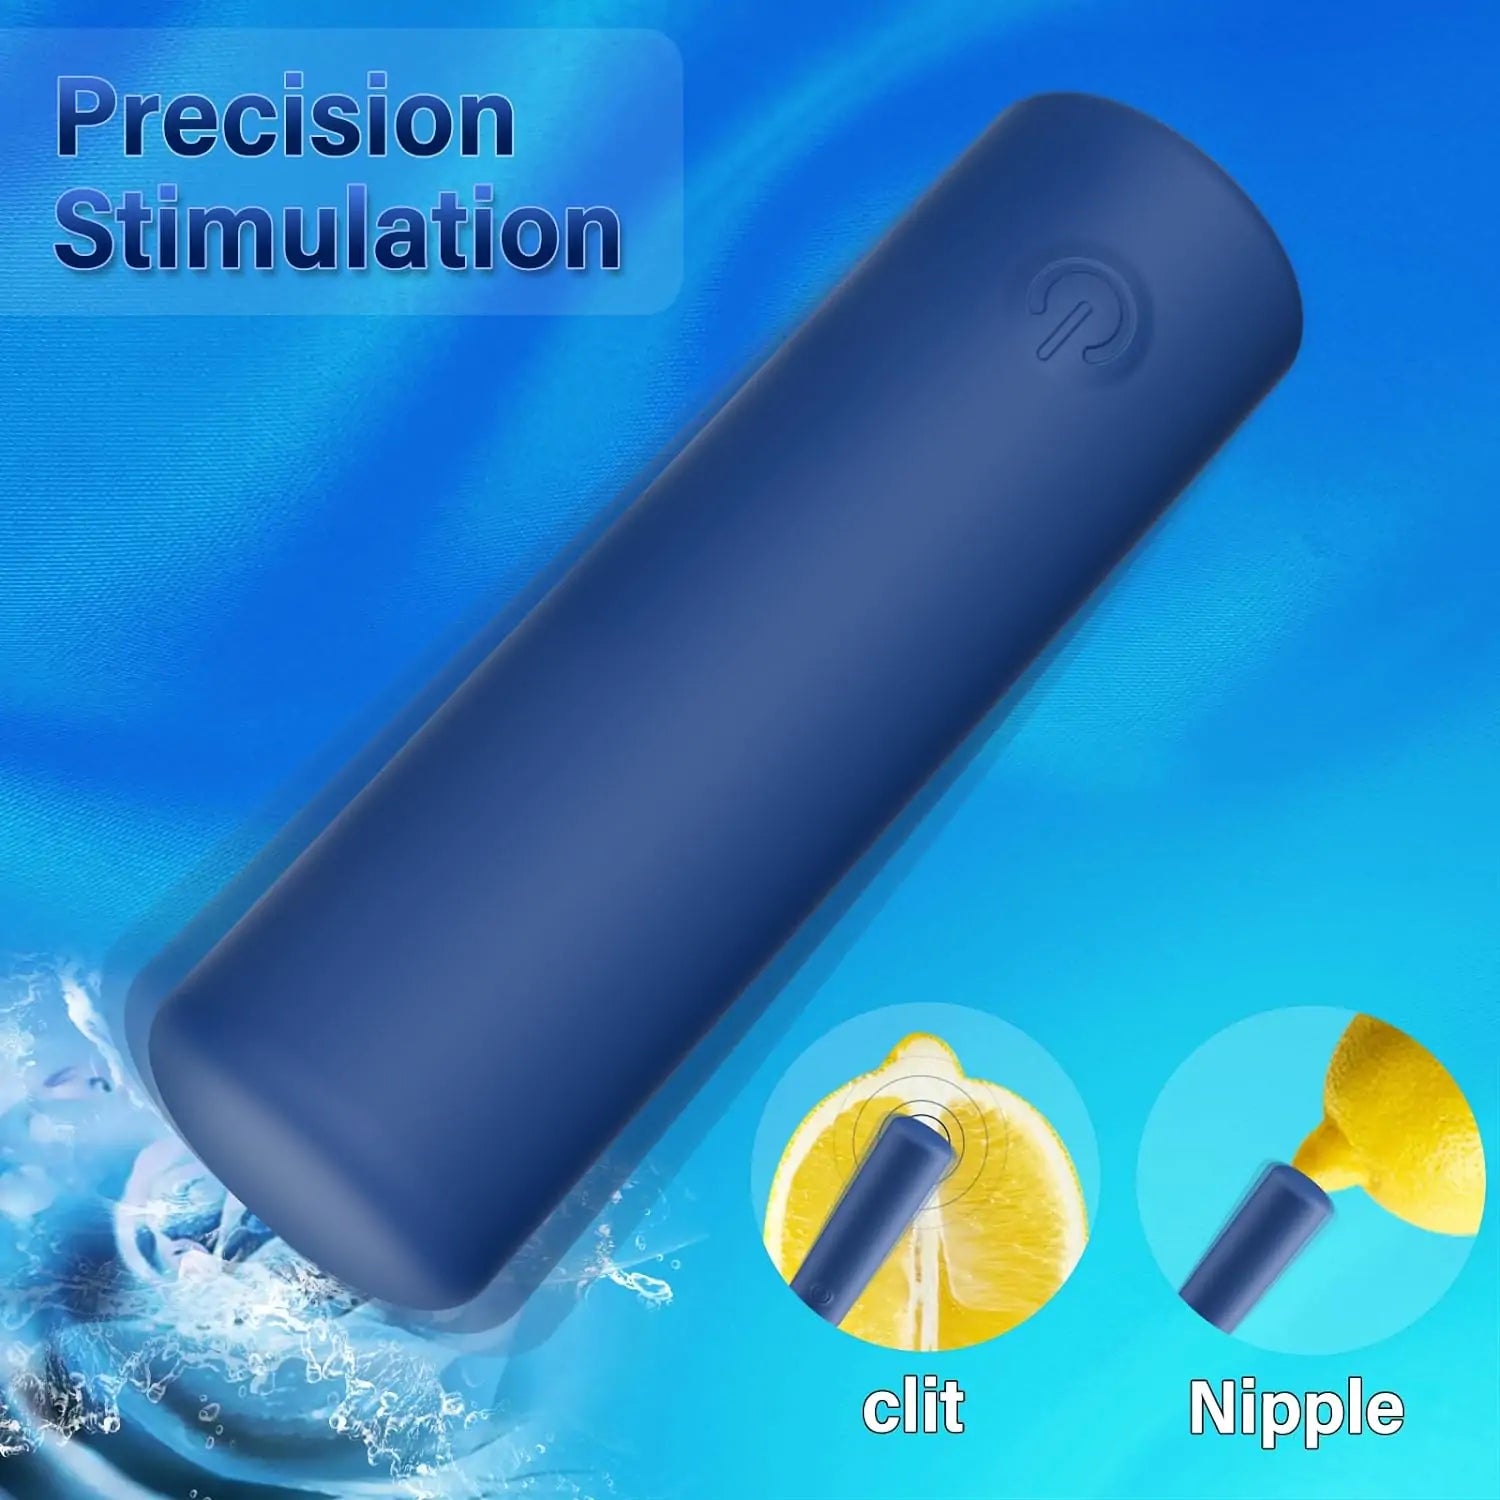 2.83 Inch Length Full-Covered Silicone Bullet Vibrator Precision Clitoral Stimulation